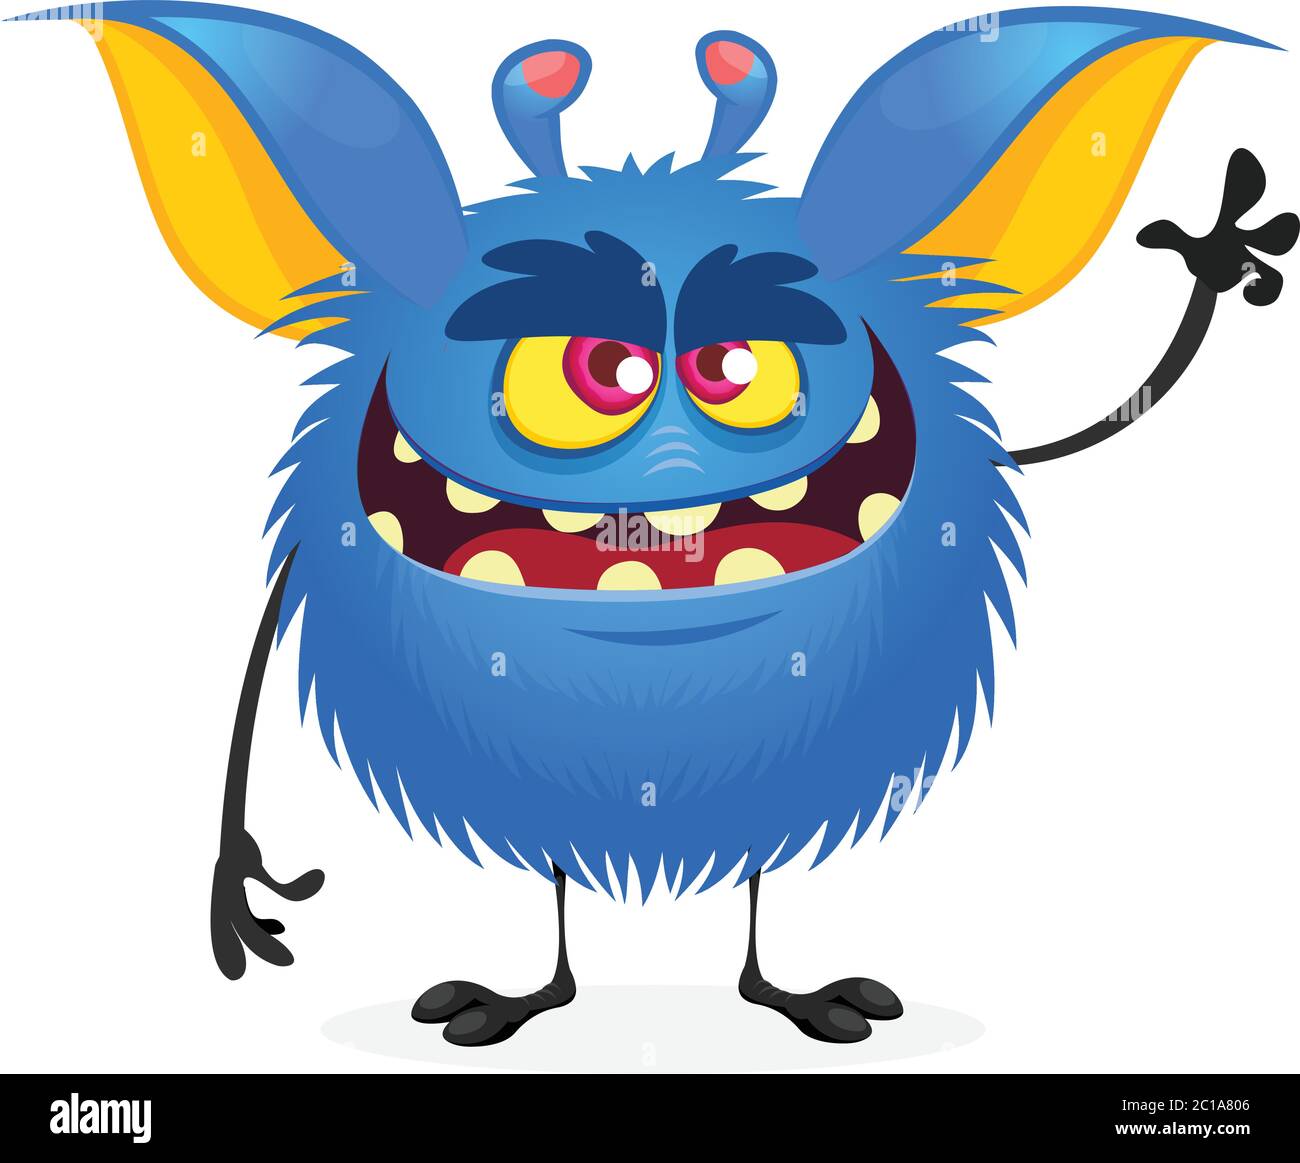 Scary cartoon monster gremlin with a big mouth waving hand. Halloween vector illustration Stock Vector